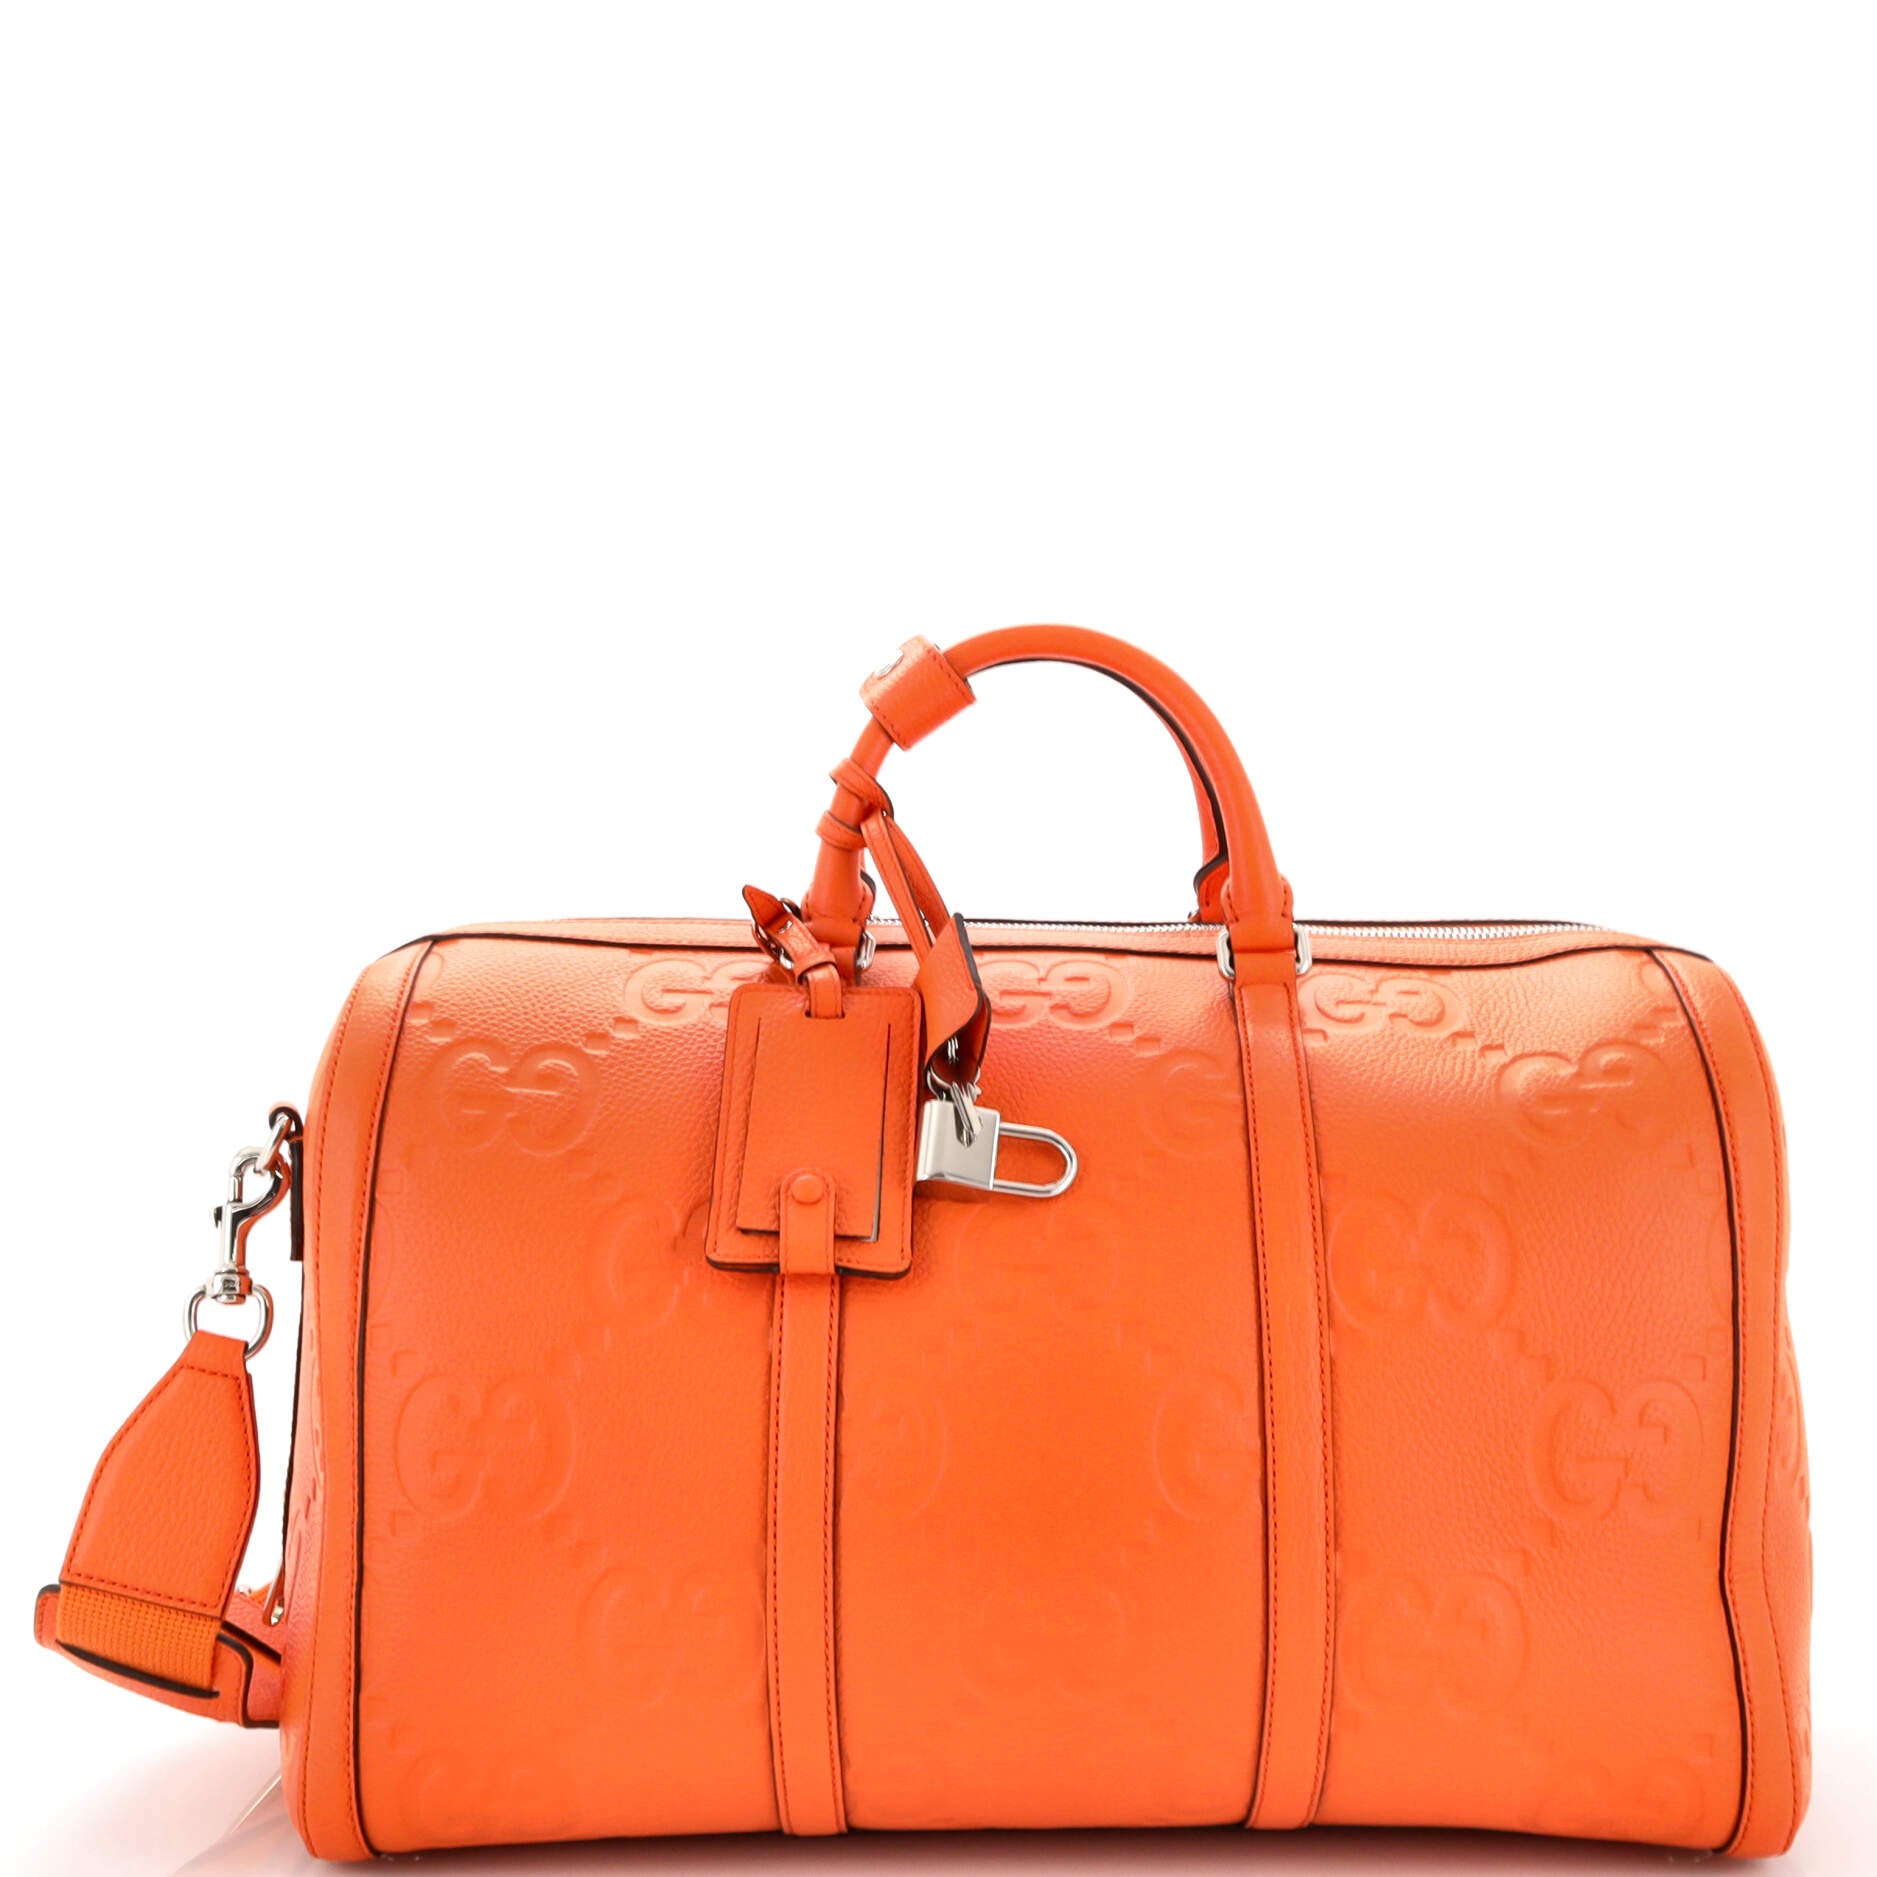 Gucci Large GG Embossed Duffle Bag - Orange Luggage and Travel